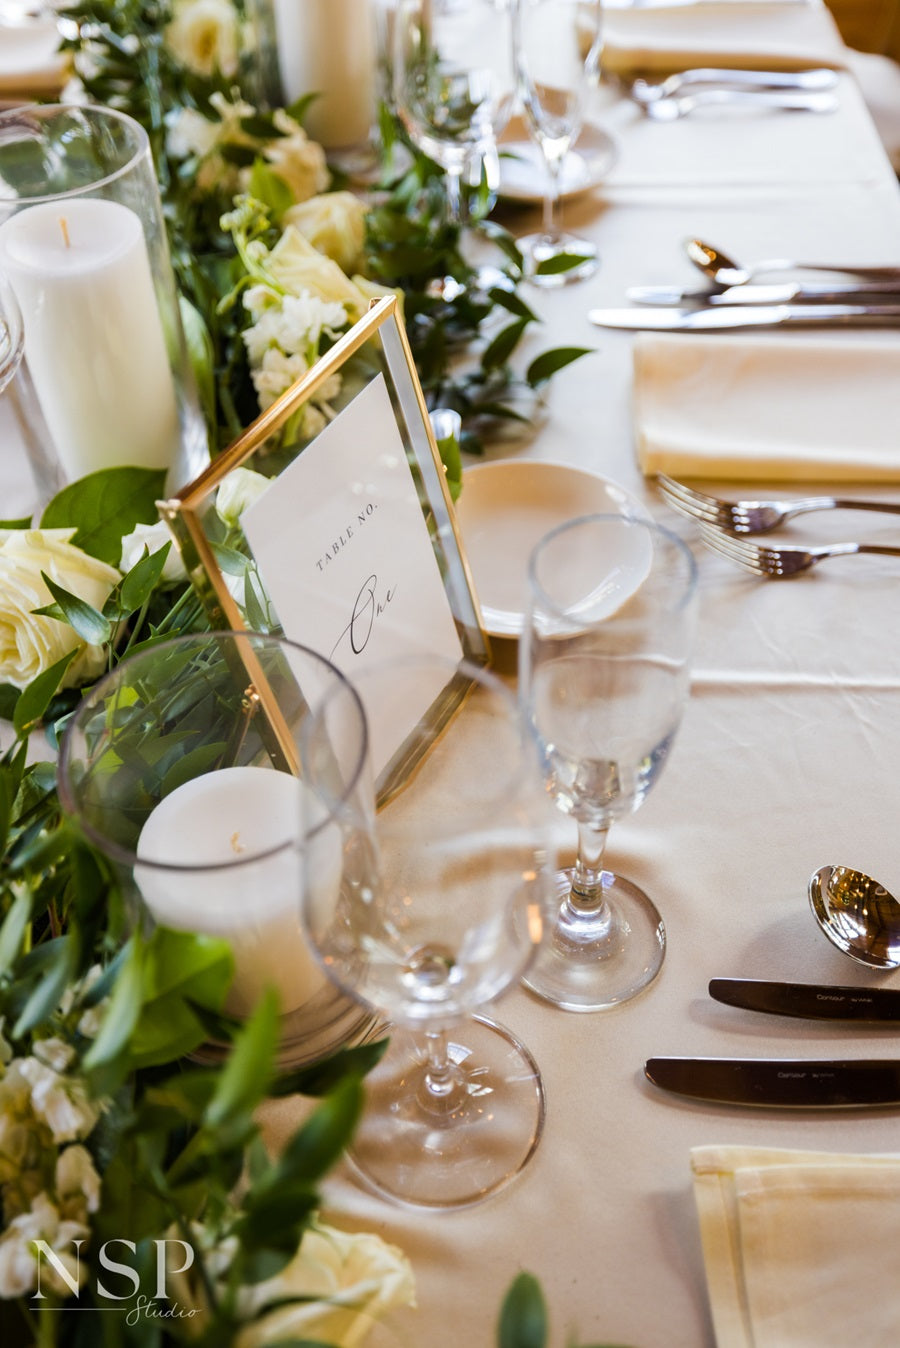 Close up on an individual table setting. Loose greenery/florals with a framed table number, pillar candles, and tableware on a white table cloth.